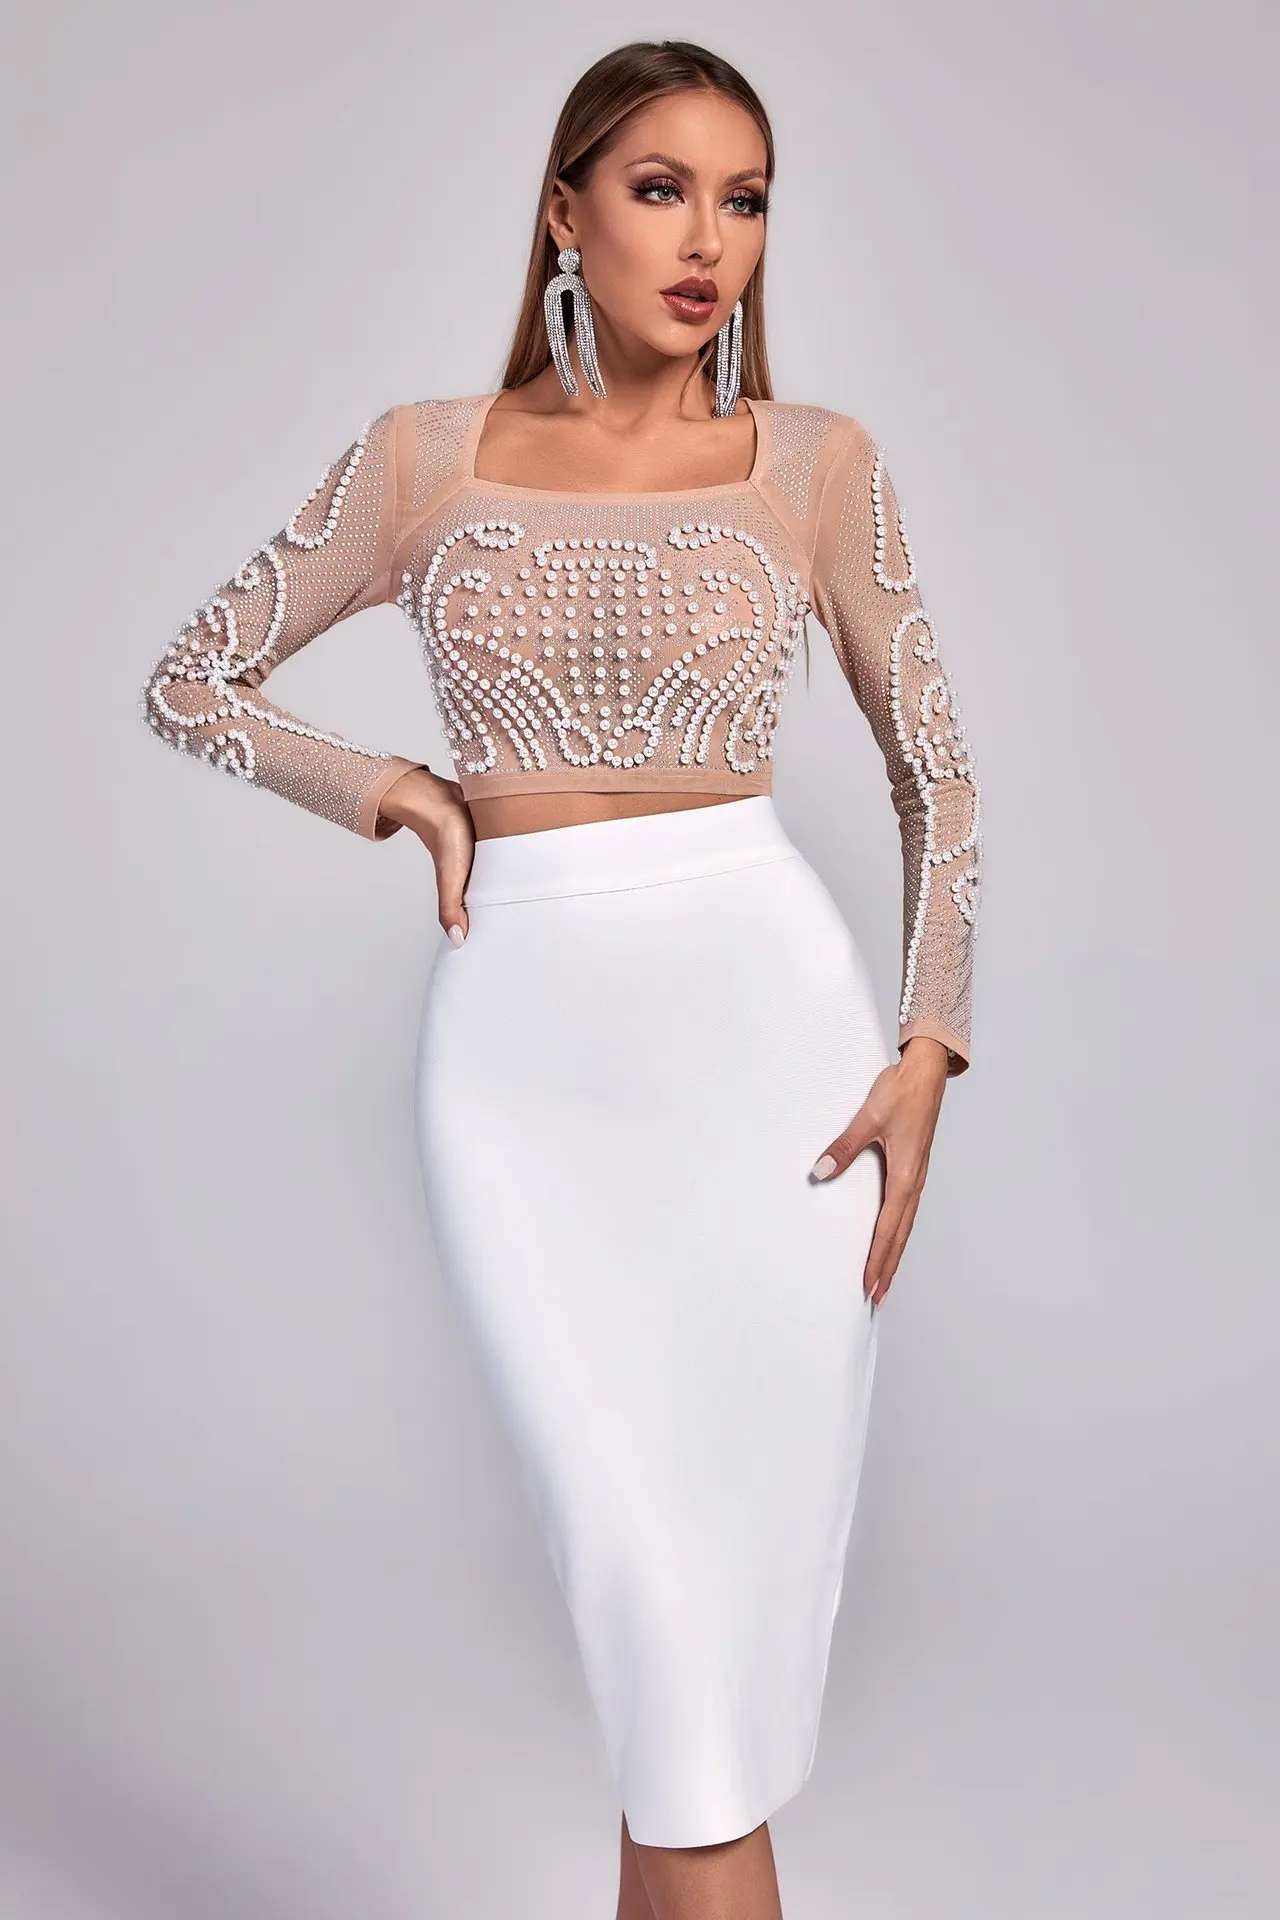 2022 New Women Winter Sexy Long Sleeve Pearl Bodycon Skirt Black White Two Piece Bandage Set Celebrity Evening Party Women's Set